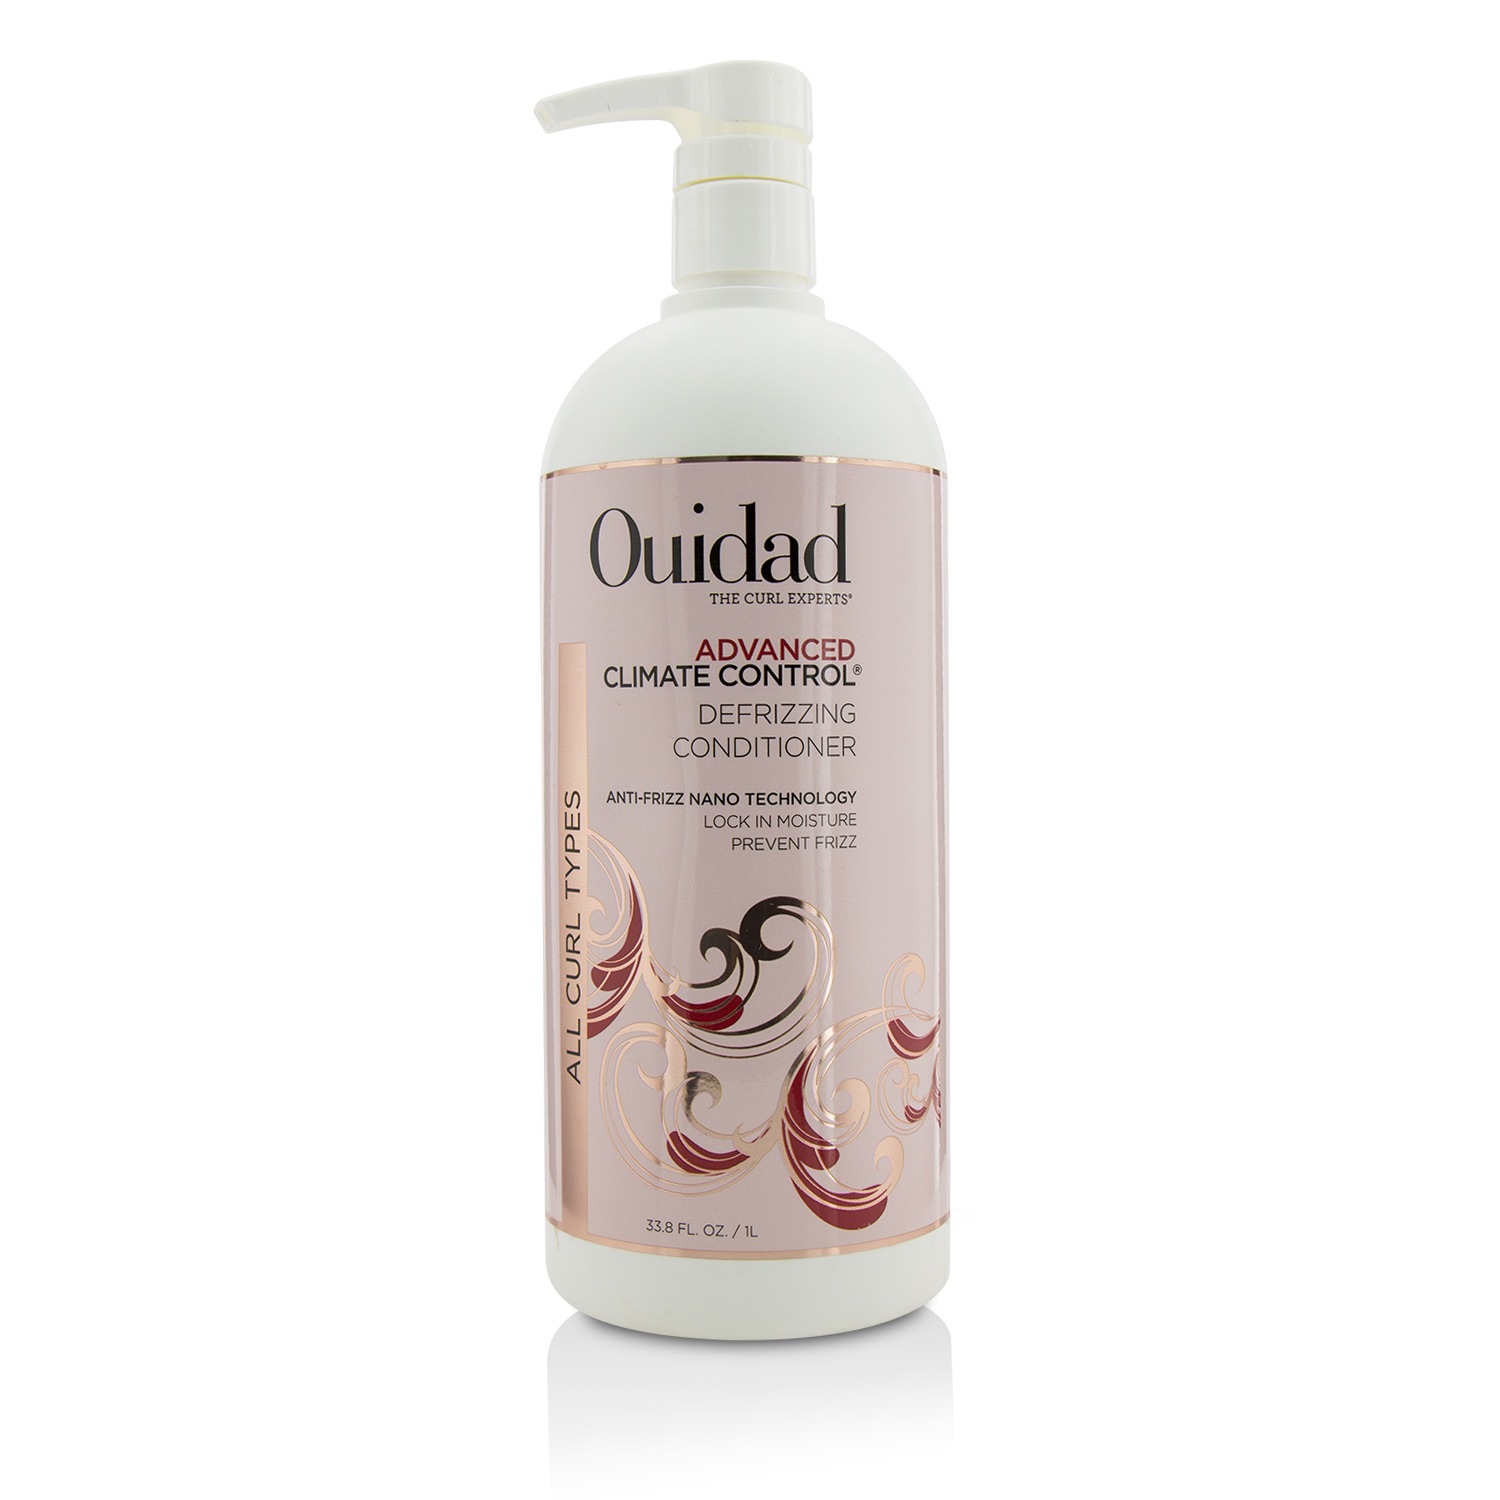 Advanced Climate Control Defrizzing Conditioner (All Curl Types) Ouidad Image